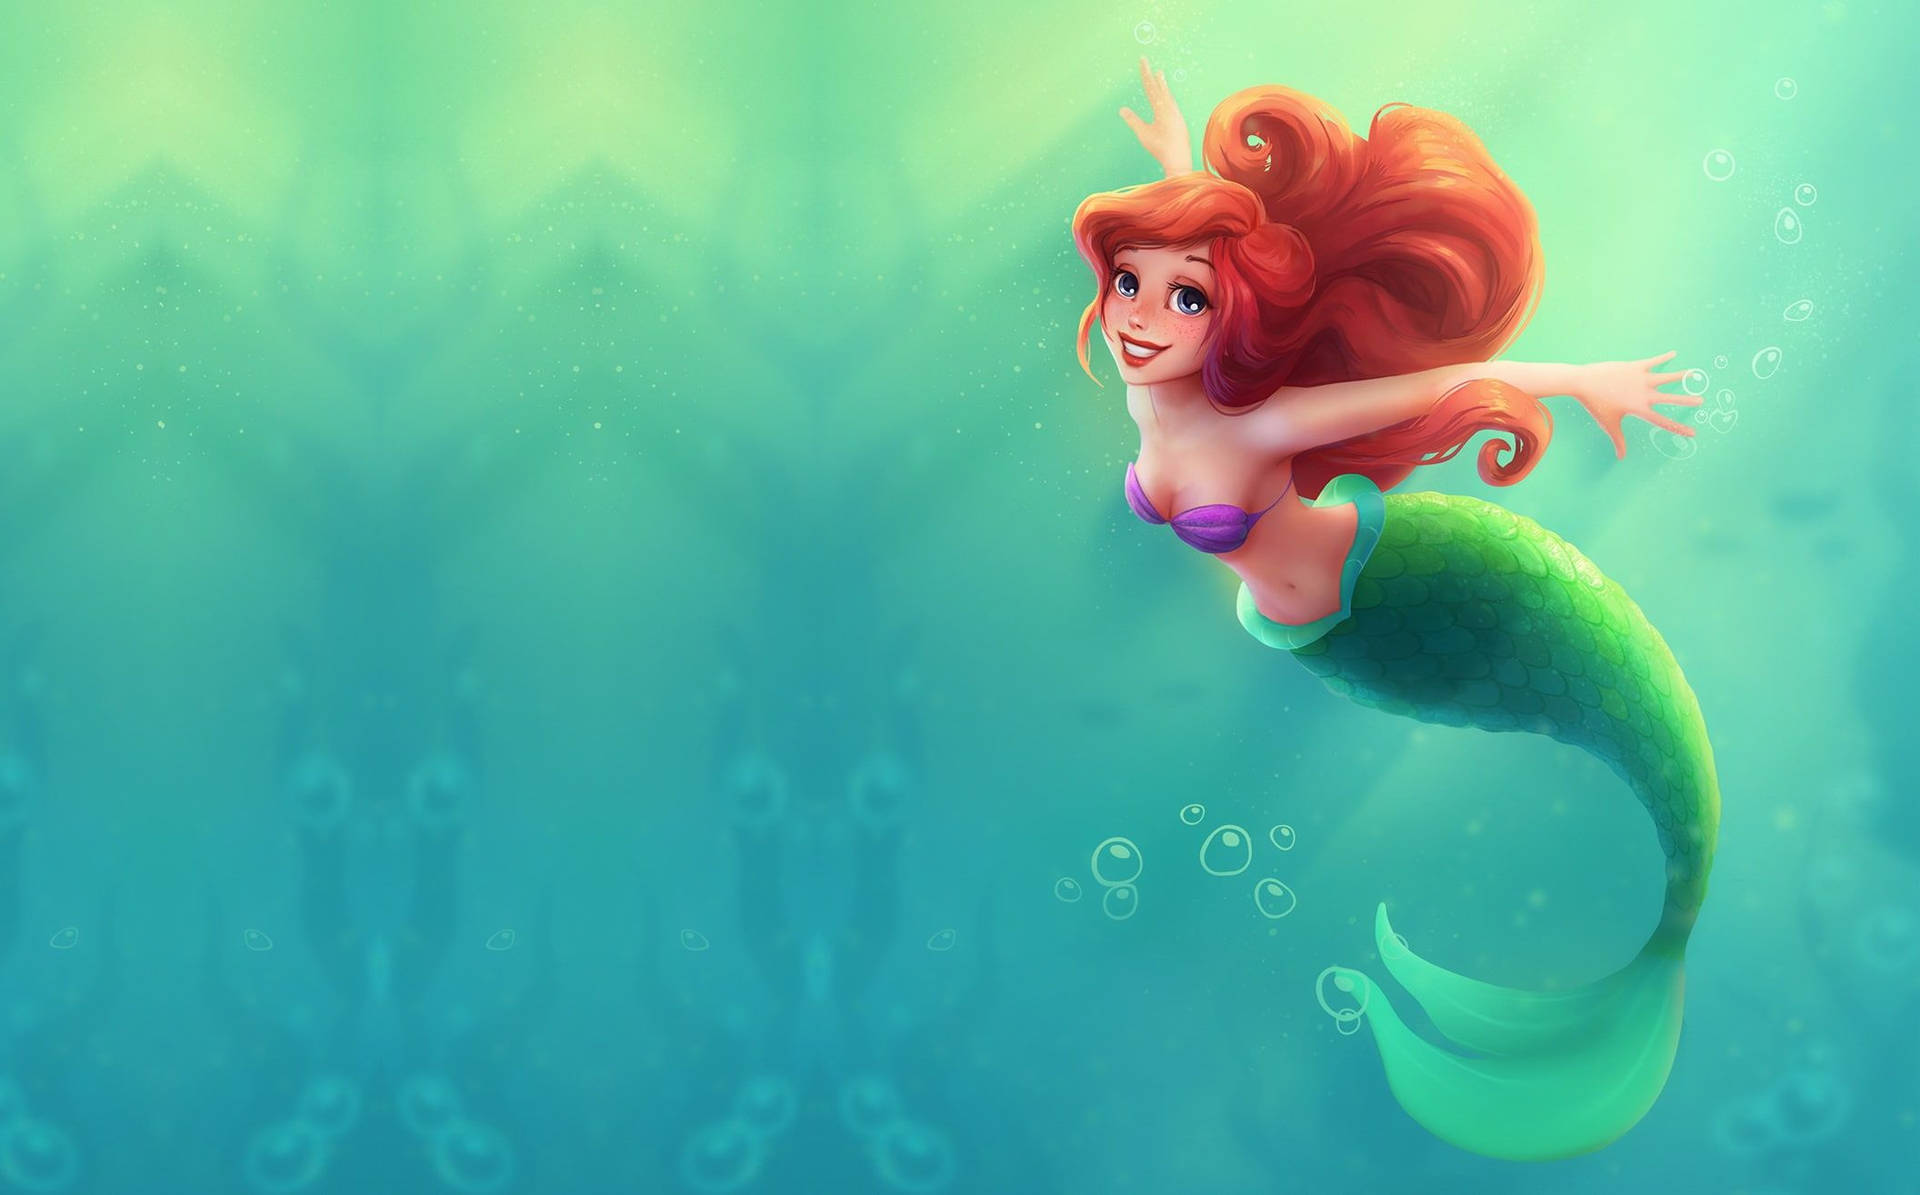 The Little Mermaid In Green Tail Background